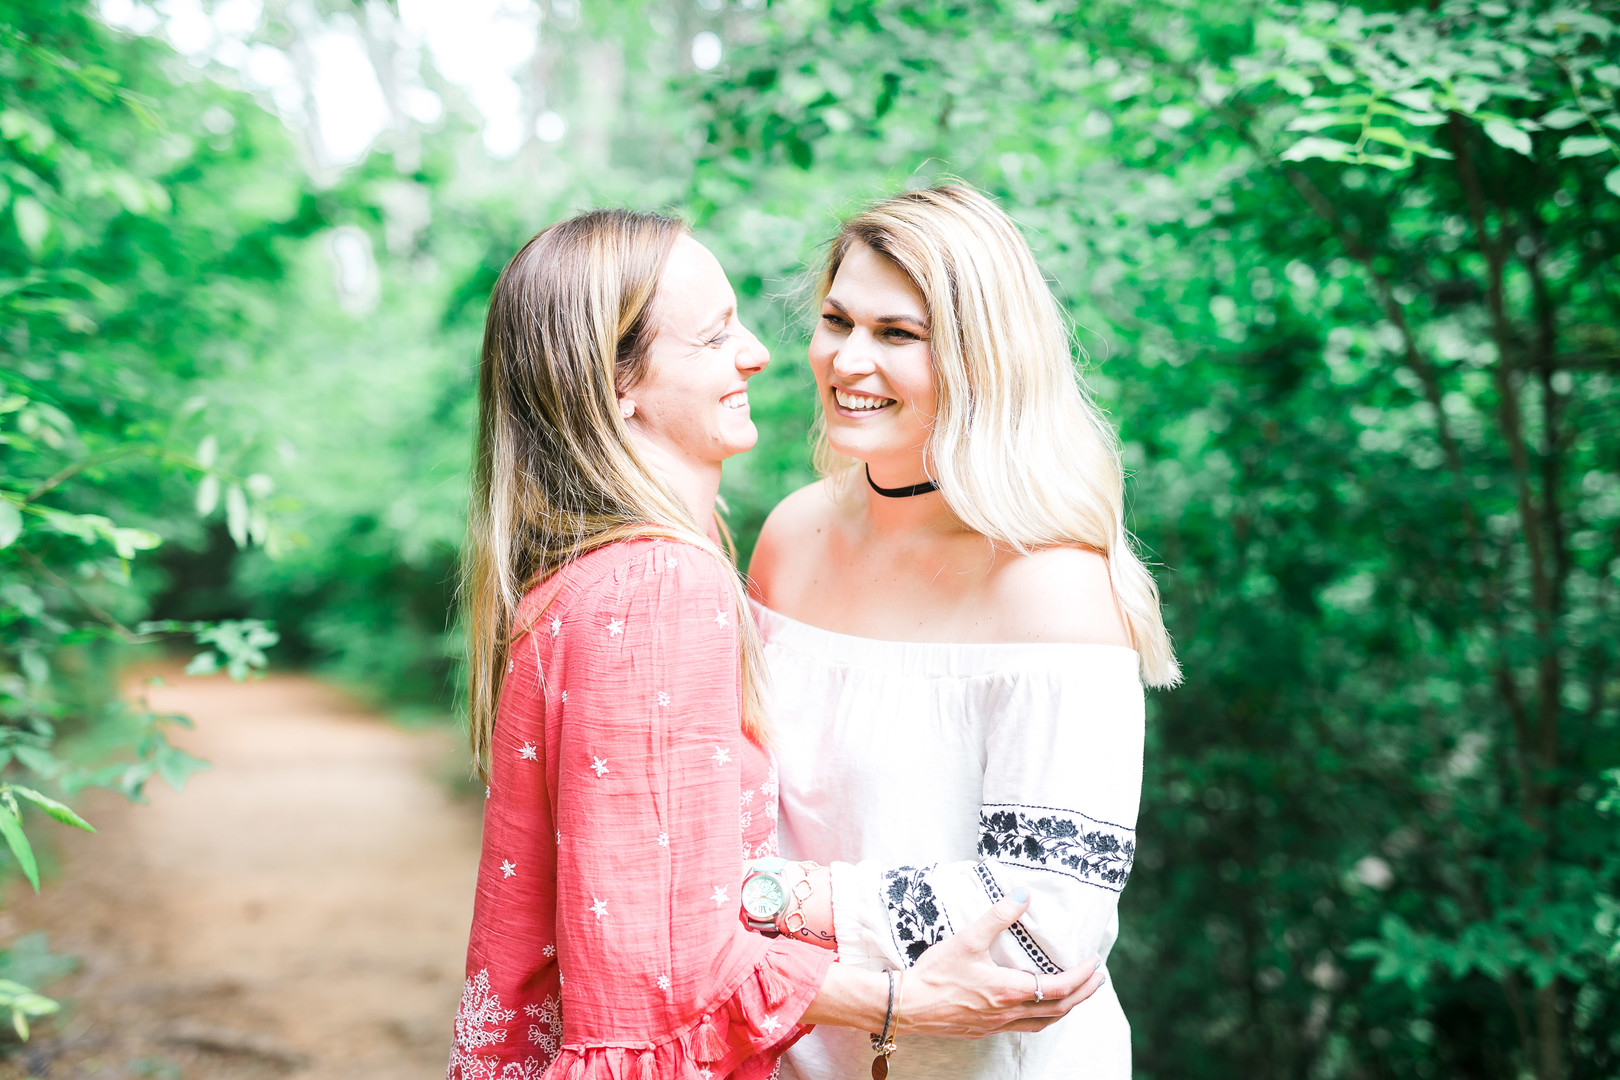 Outdoor engagement session at High Falls State Park in Georgia